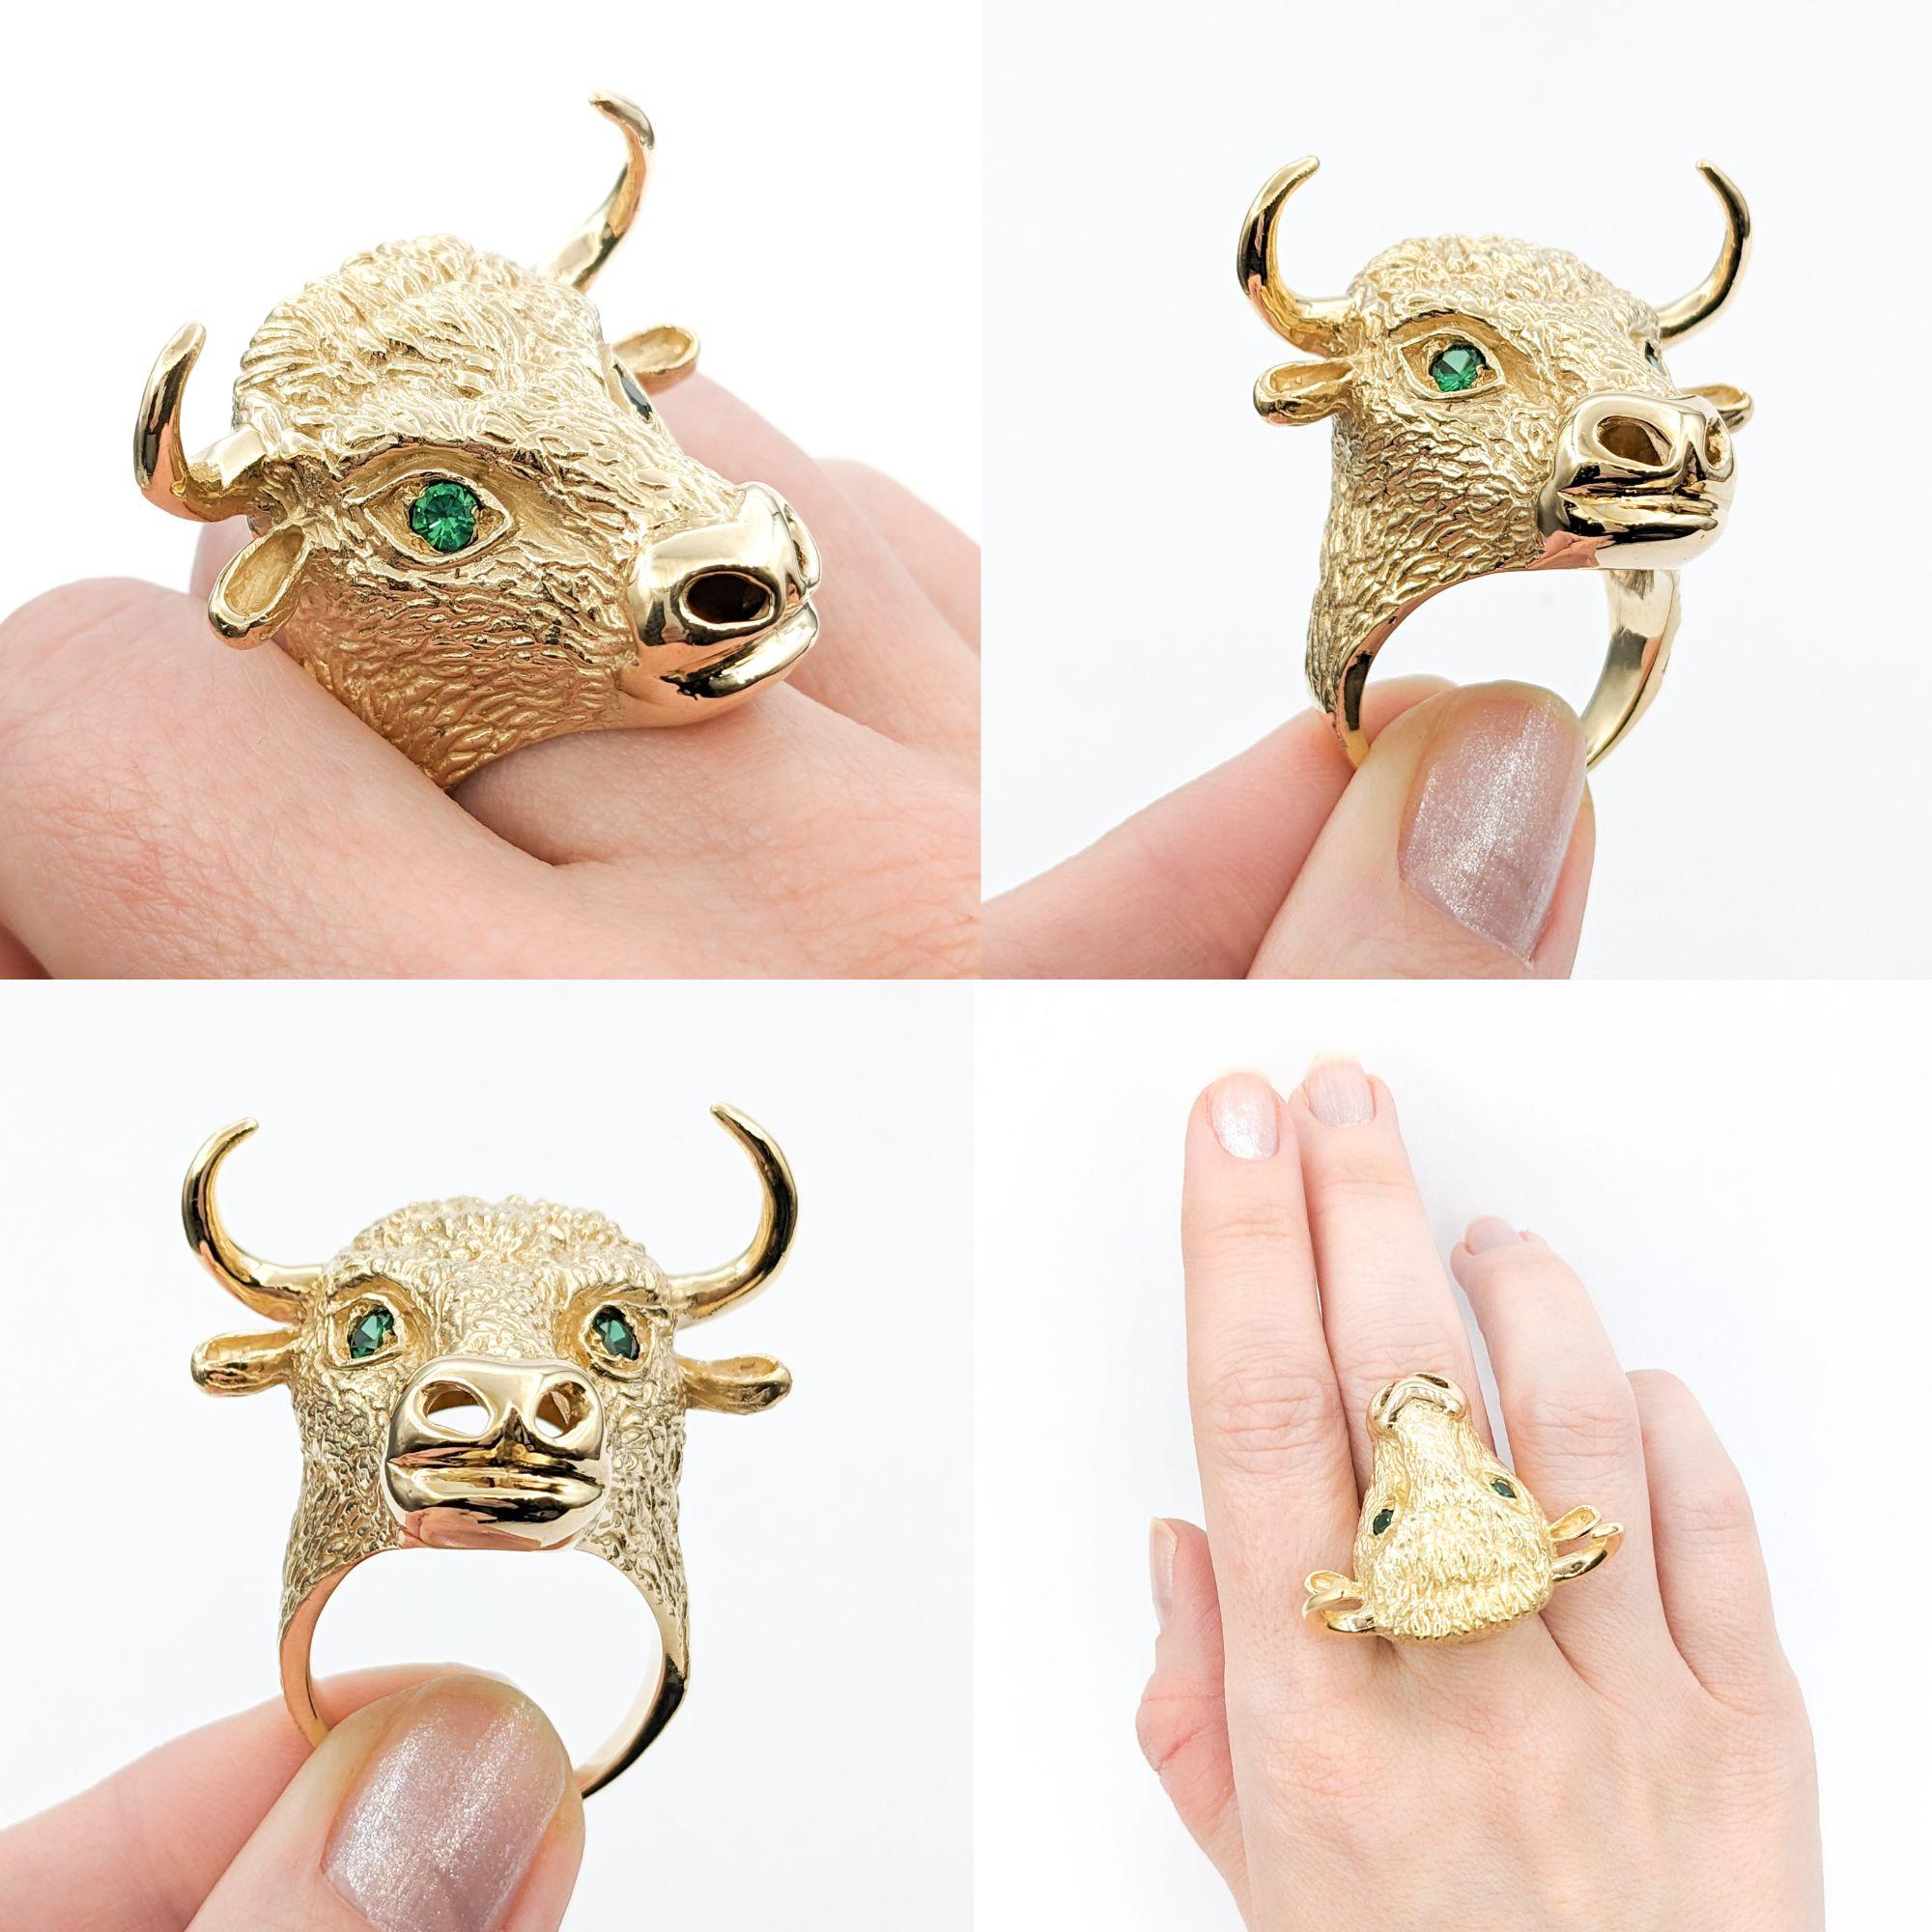 .20ctw Emerald Bull Head with Horns Custom Design Ring In Yellow Gold


This unique and striking ring is expertly crafted in 14kt yellow gold, featuring a .20ctw round emerald centerpiece. The design takes inspiration from a bull's head with horns,